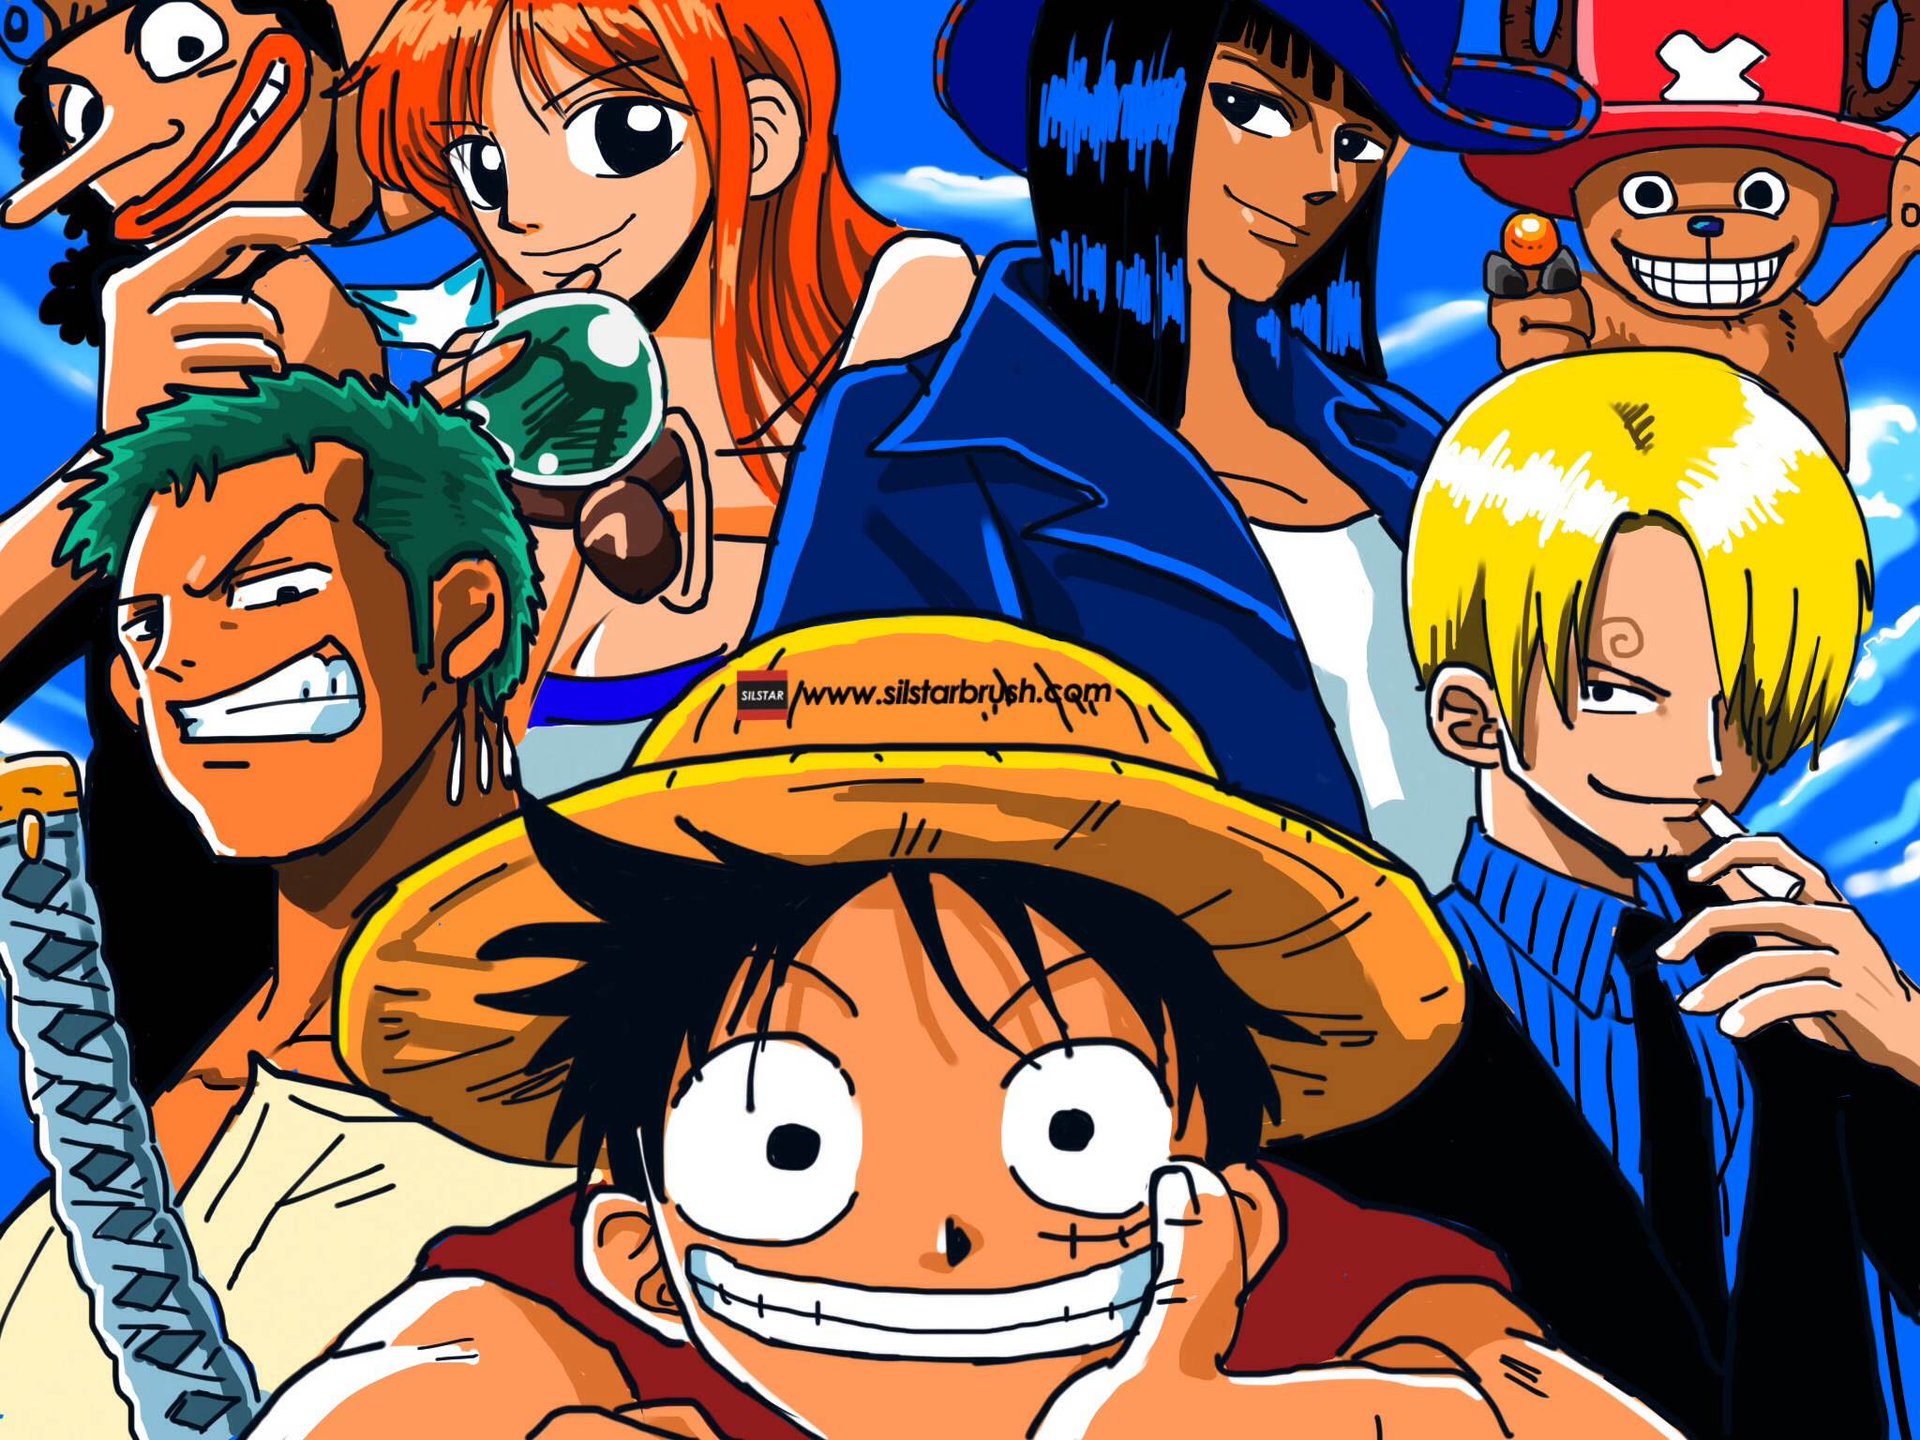 ArtStation - A drawing of ‘One-piece’ characters by SILSTARBRUSH w ...